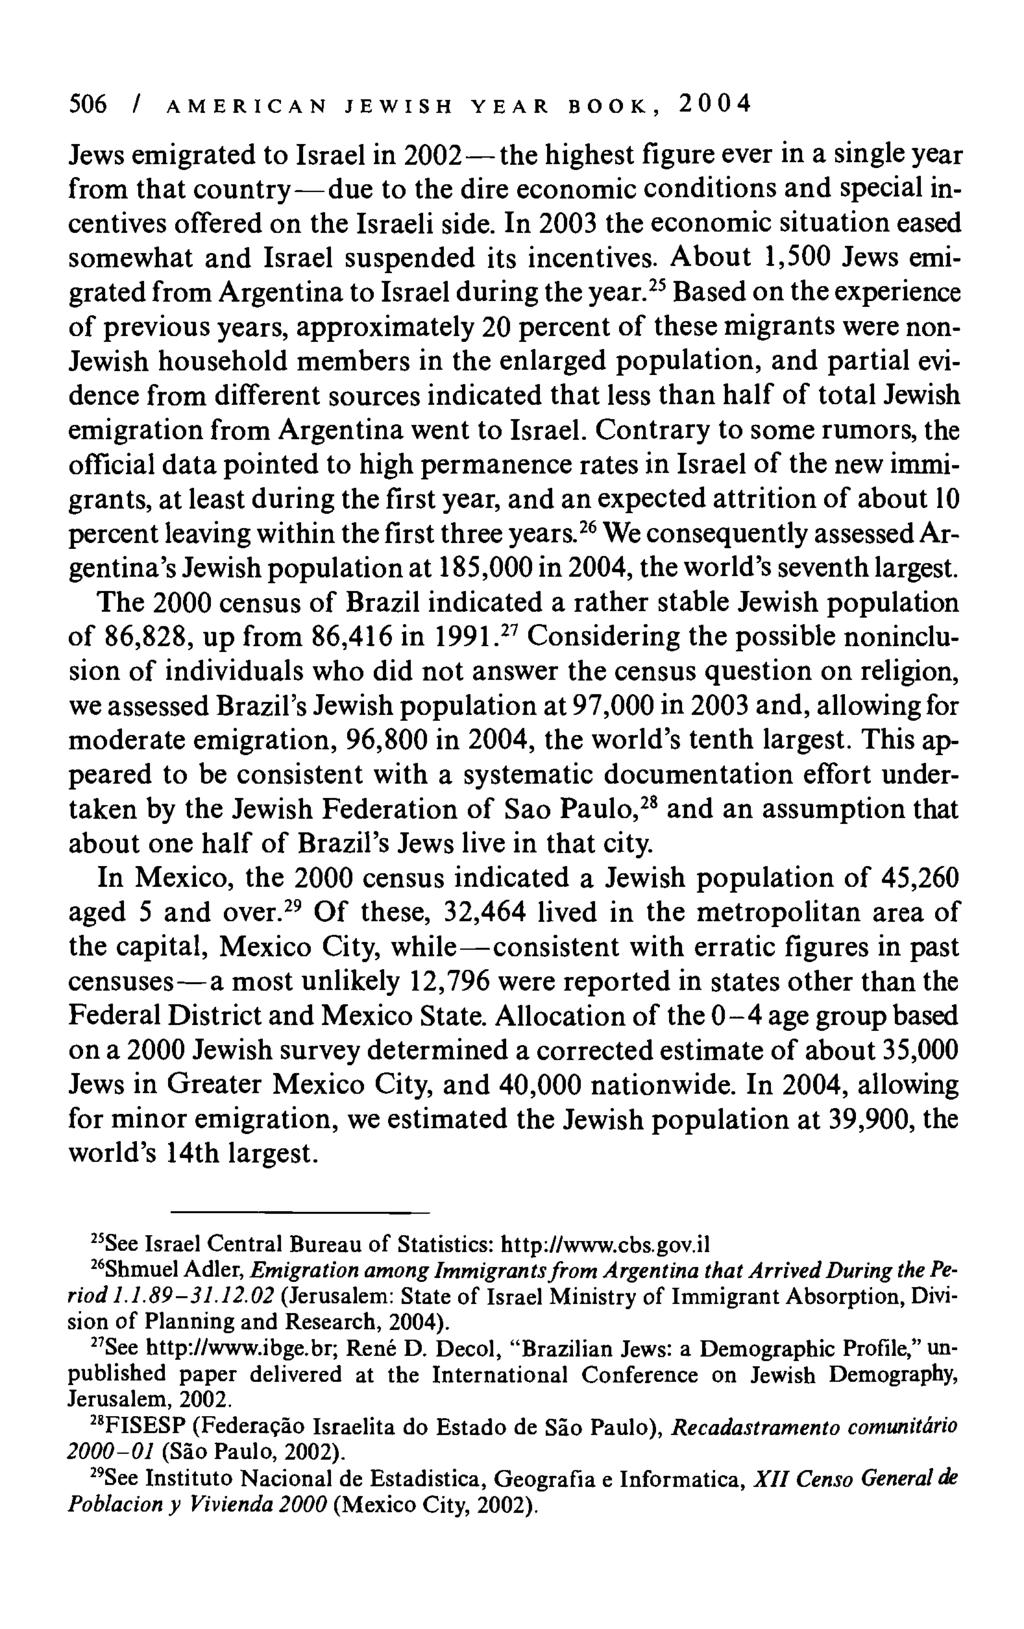 506 / AMERICAN JEWISH YEAR BOOK, 2004 Jews emigrated to Israel in 2002 the highest figure ever in a single year from that country due to the dire economic conditions and special incentives offered on